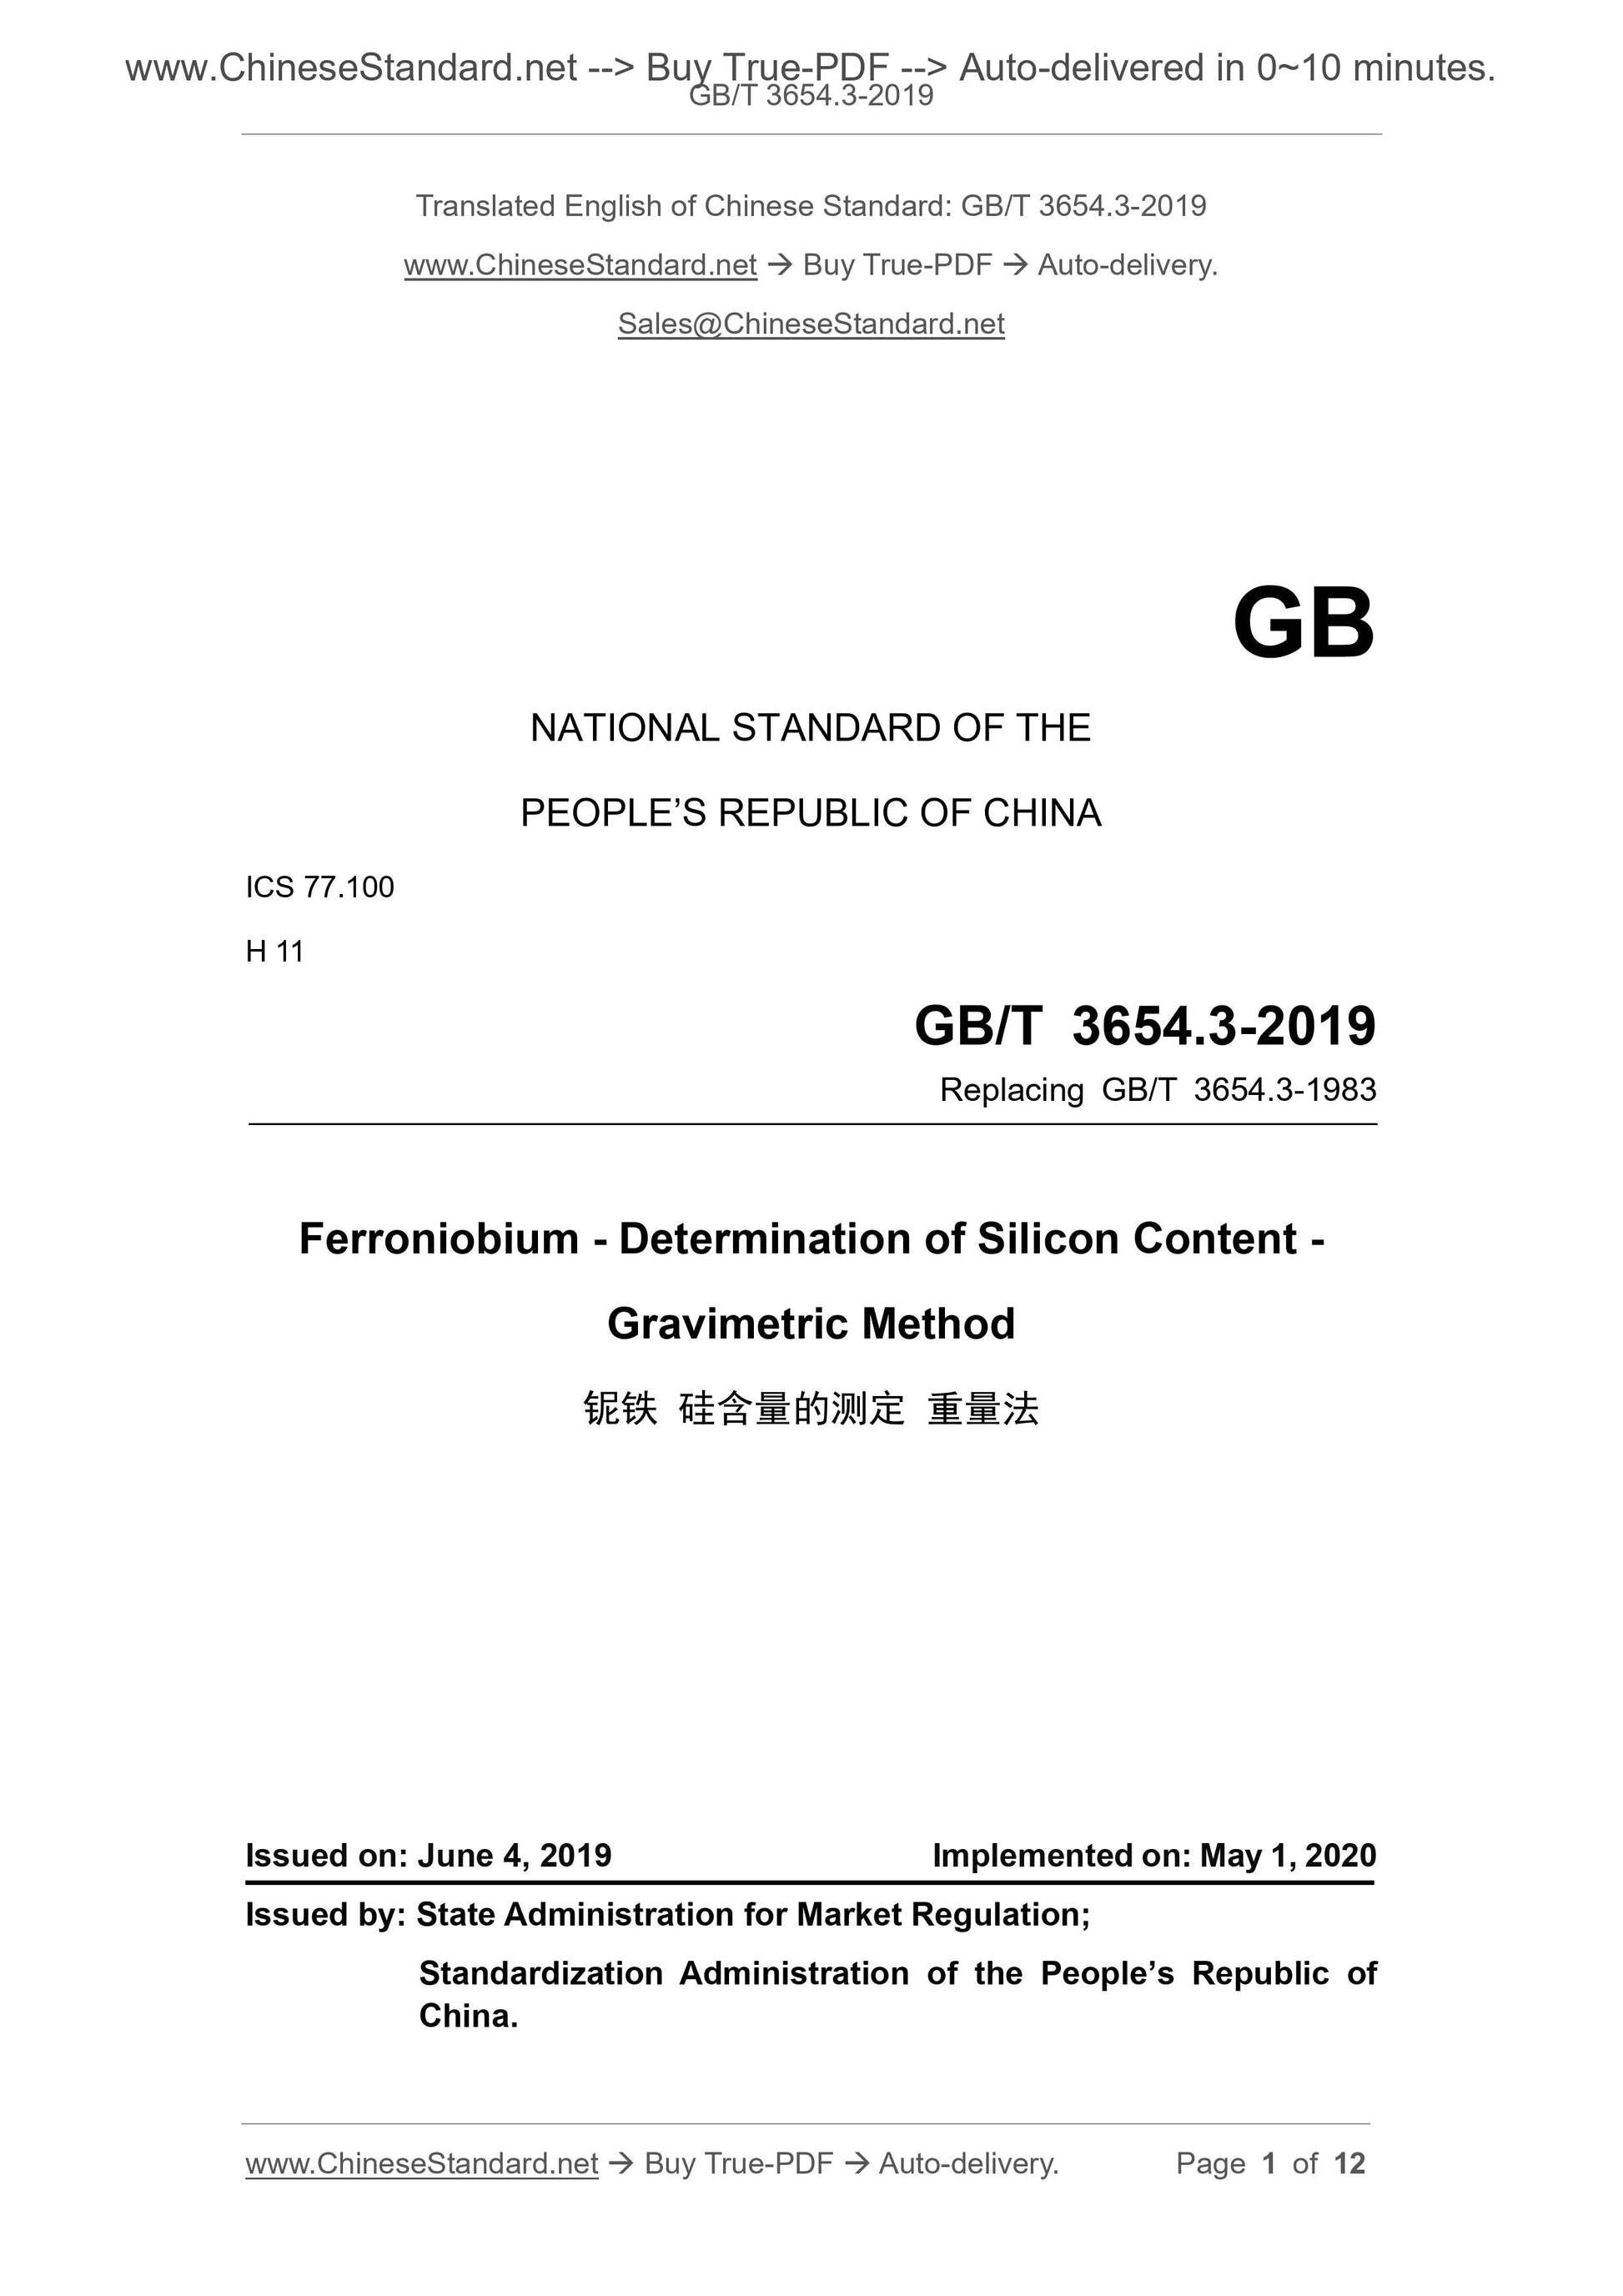 GB/T 3654.3-2019 Page 1